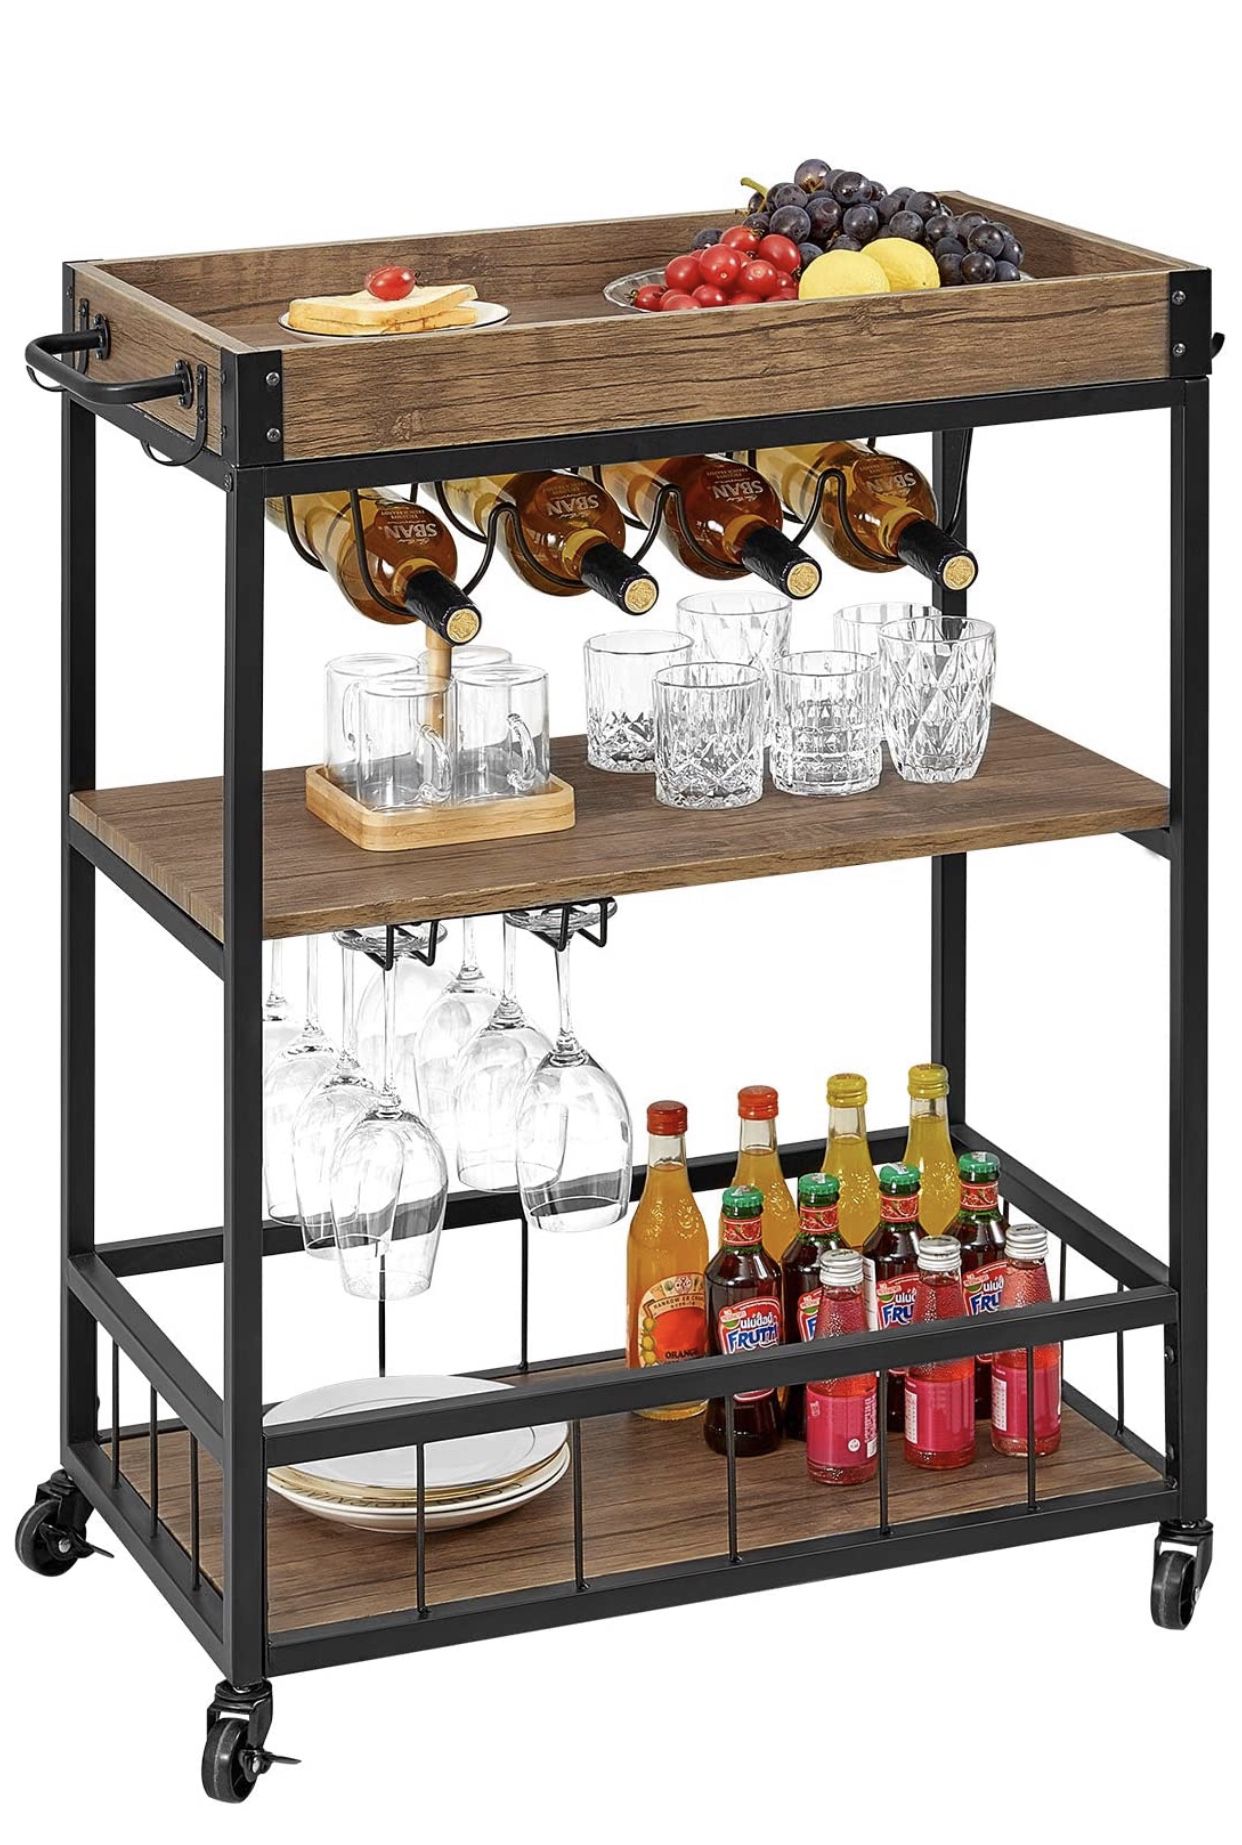 kealive Bar Cart for Home Mobile Metal Wood Wine Cart on Wheels with Handle Rack, Glass Holder, 4 Hooker Removable Wood Box Container, Industrial Rus